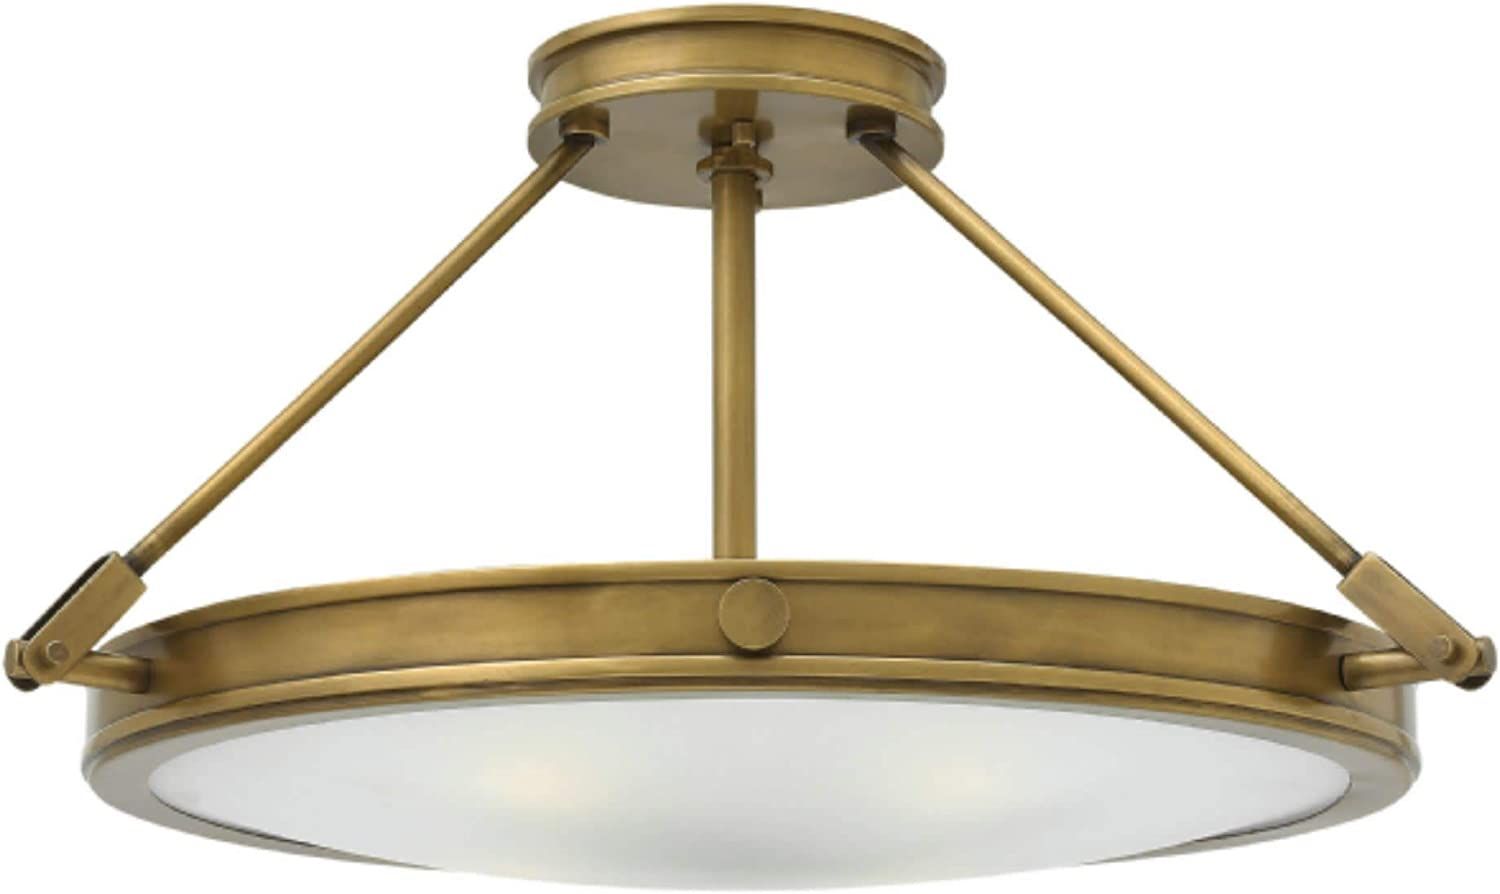 Hinkley Collier Collection 11.5" 16W Integrated LED Semi-Flush Mount, Heritage Brass | Amazon (US)